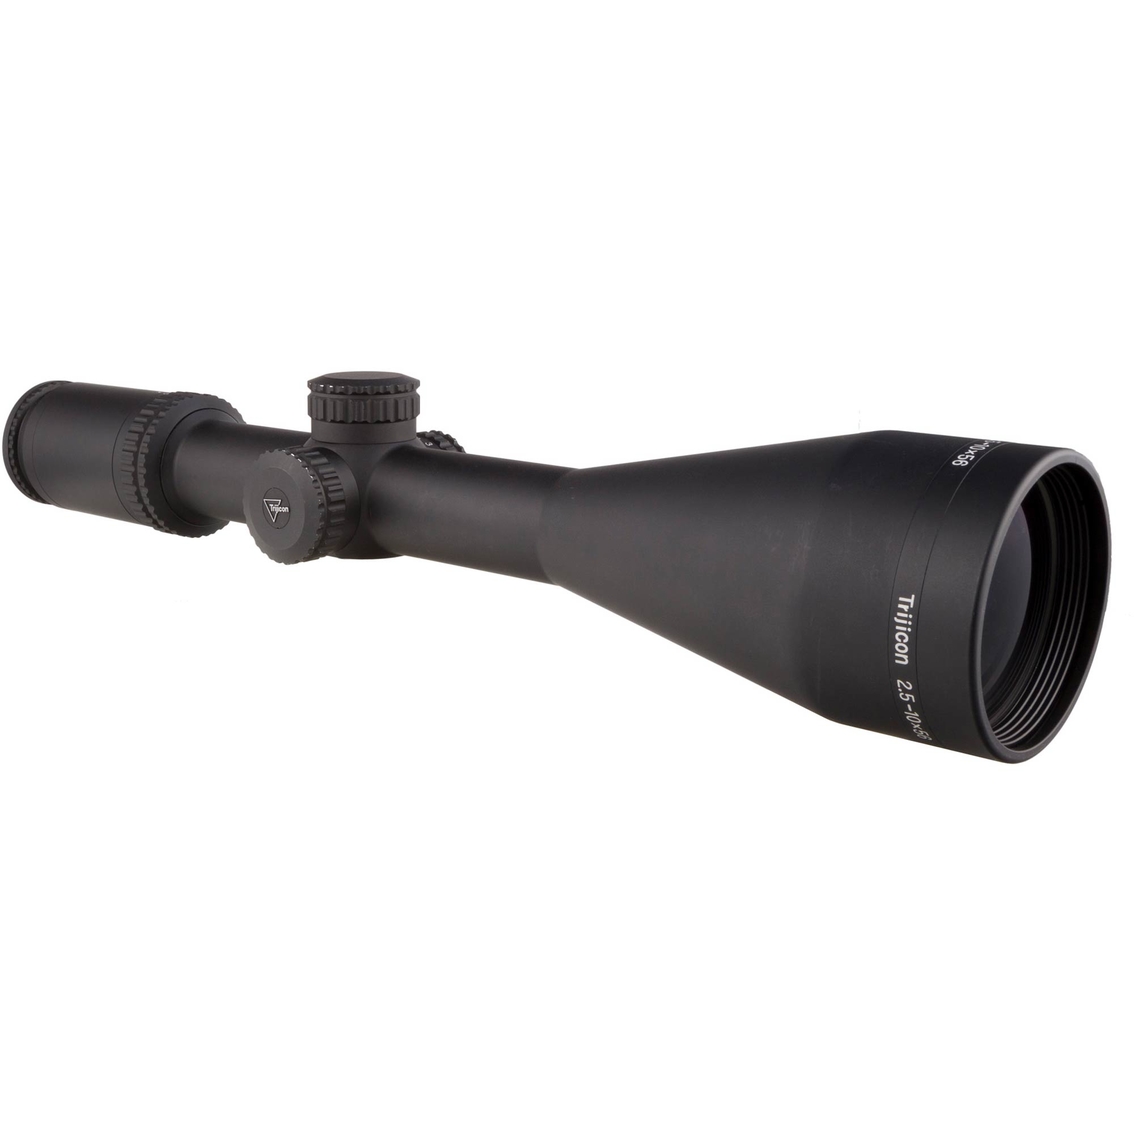 Trijicon AccuPower 2.5-10x56 MOA Red Riflescope - Image 2 of 4